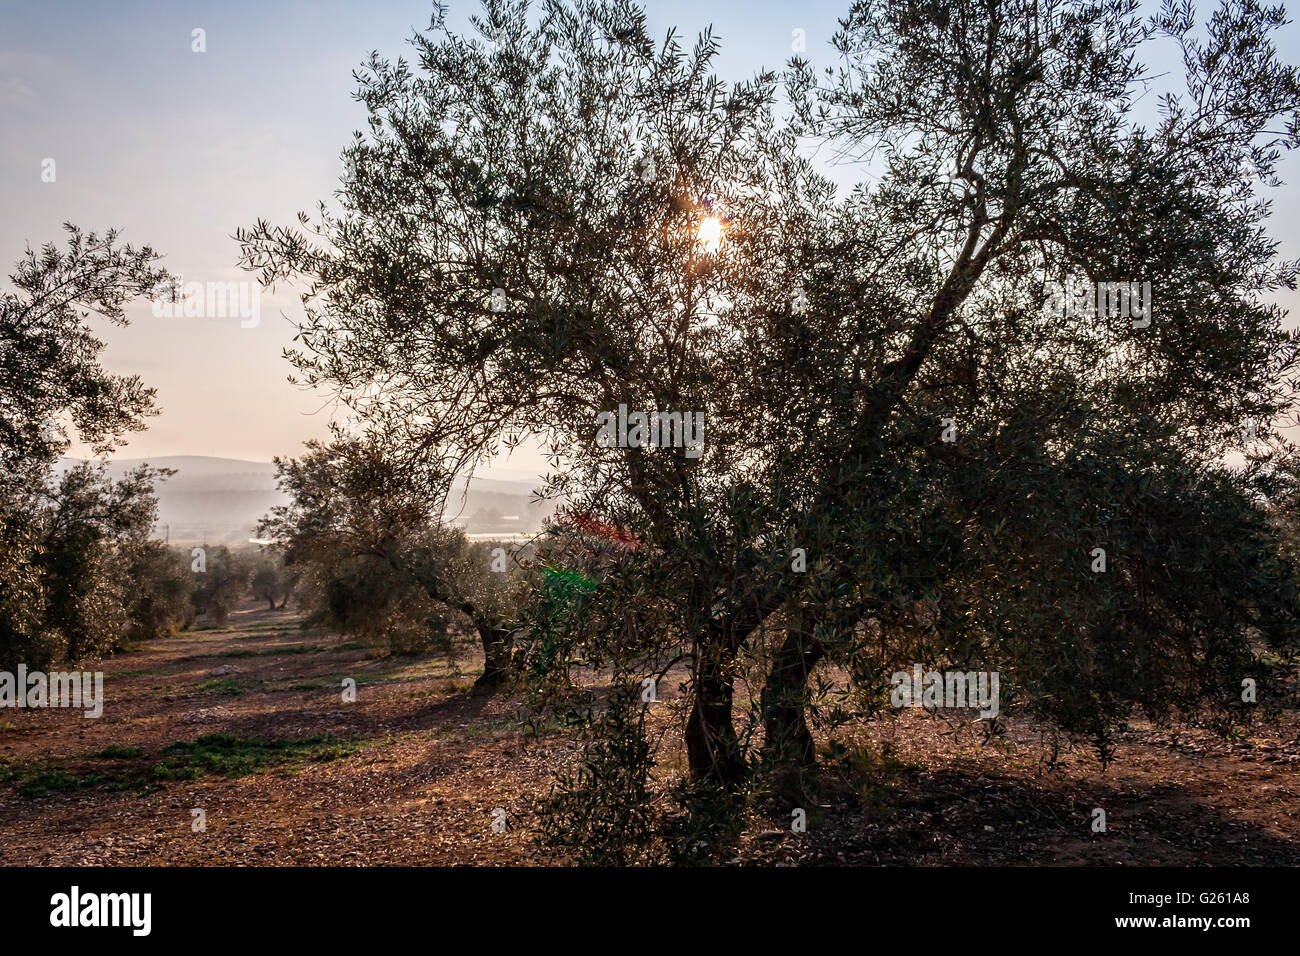 Olive tree silhouette to the evening, scenery to back light near Jaen, Spain Stock Photo